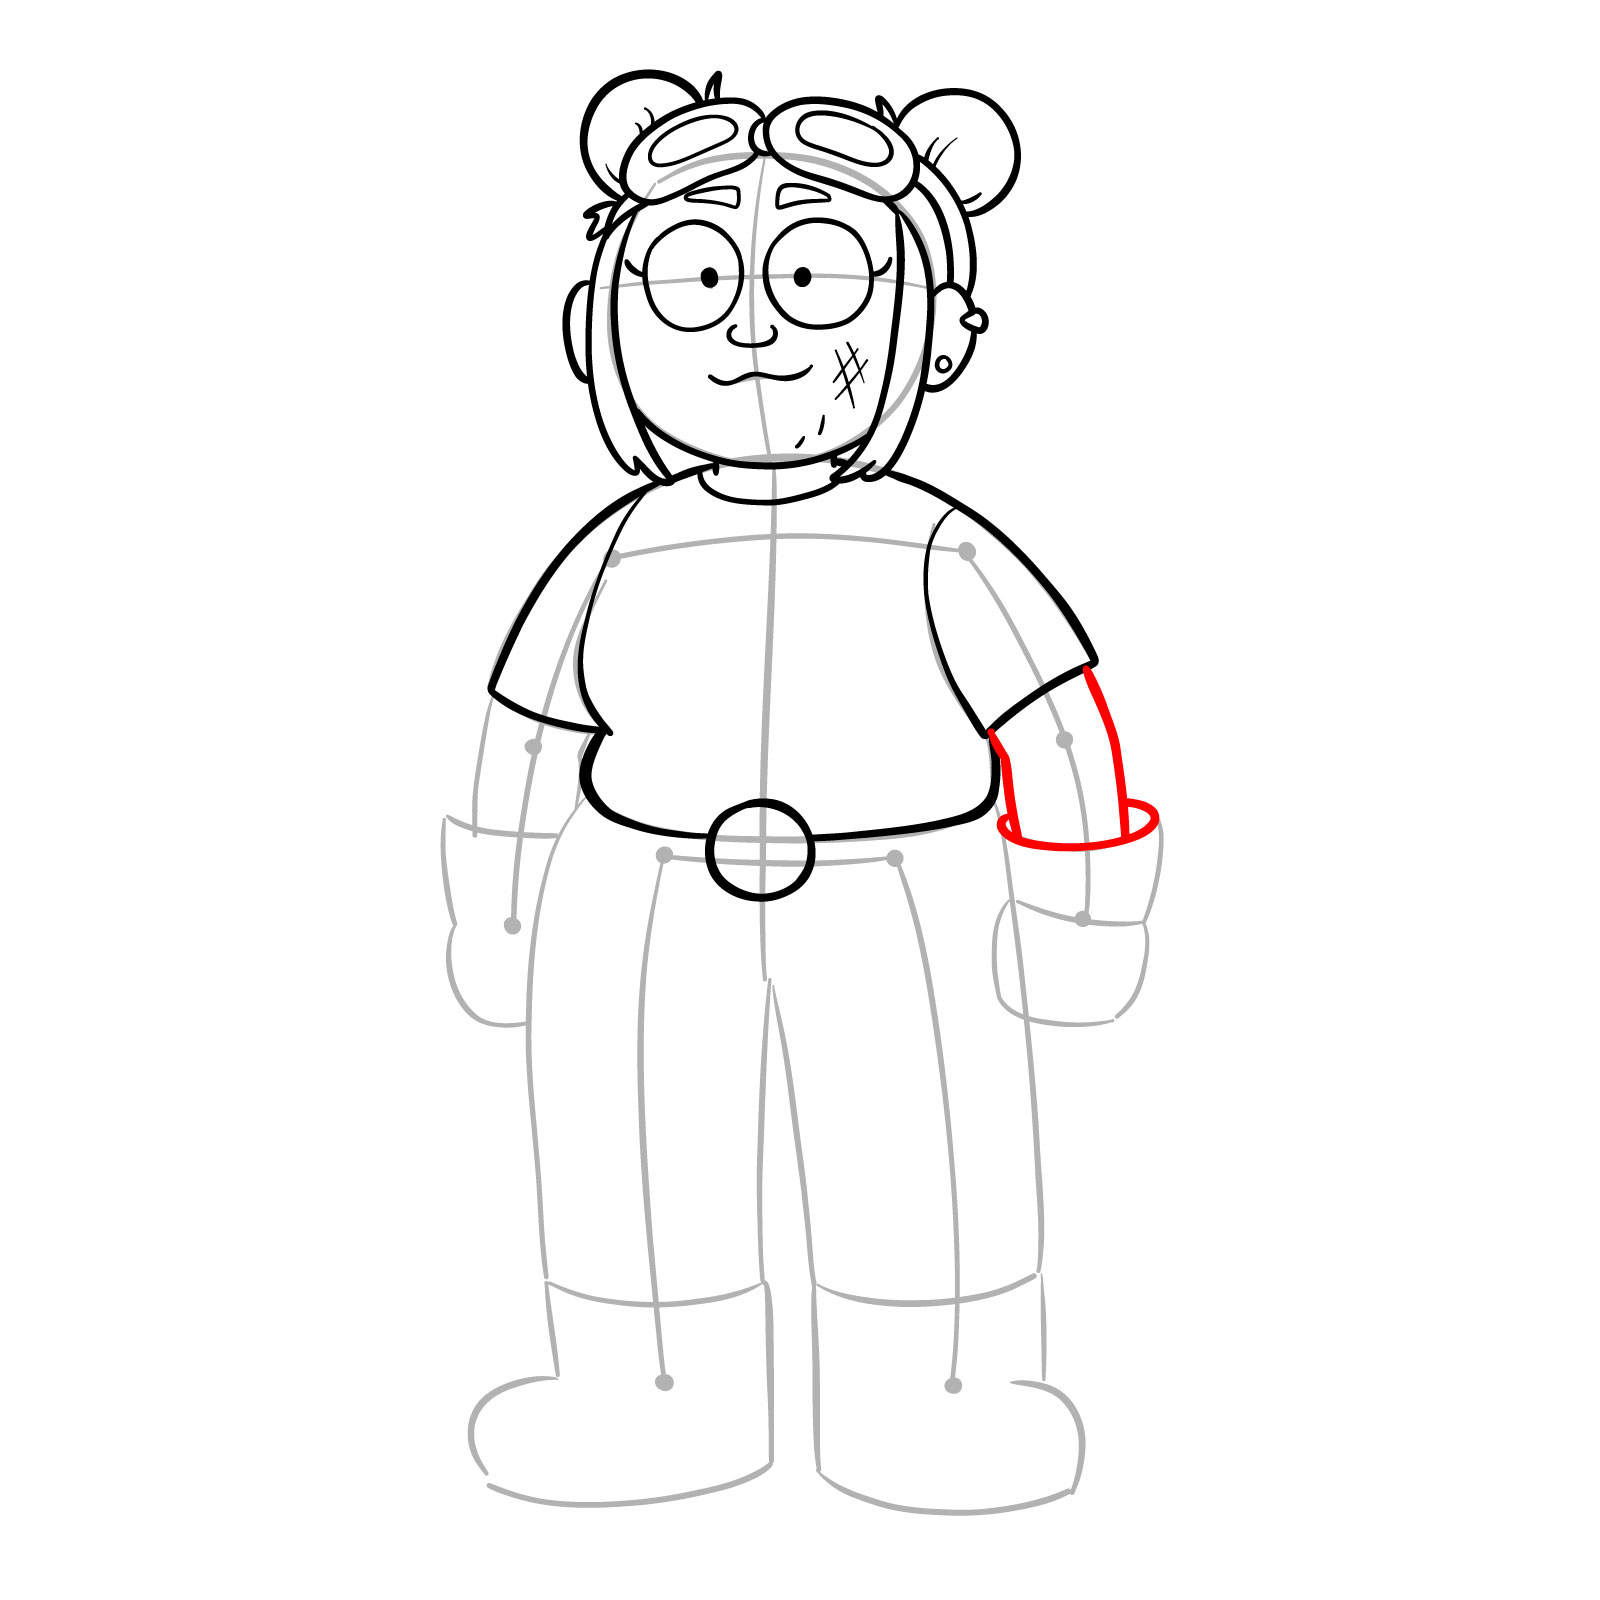 How to draw Jess from Amphibia - step 11